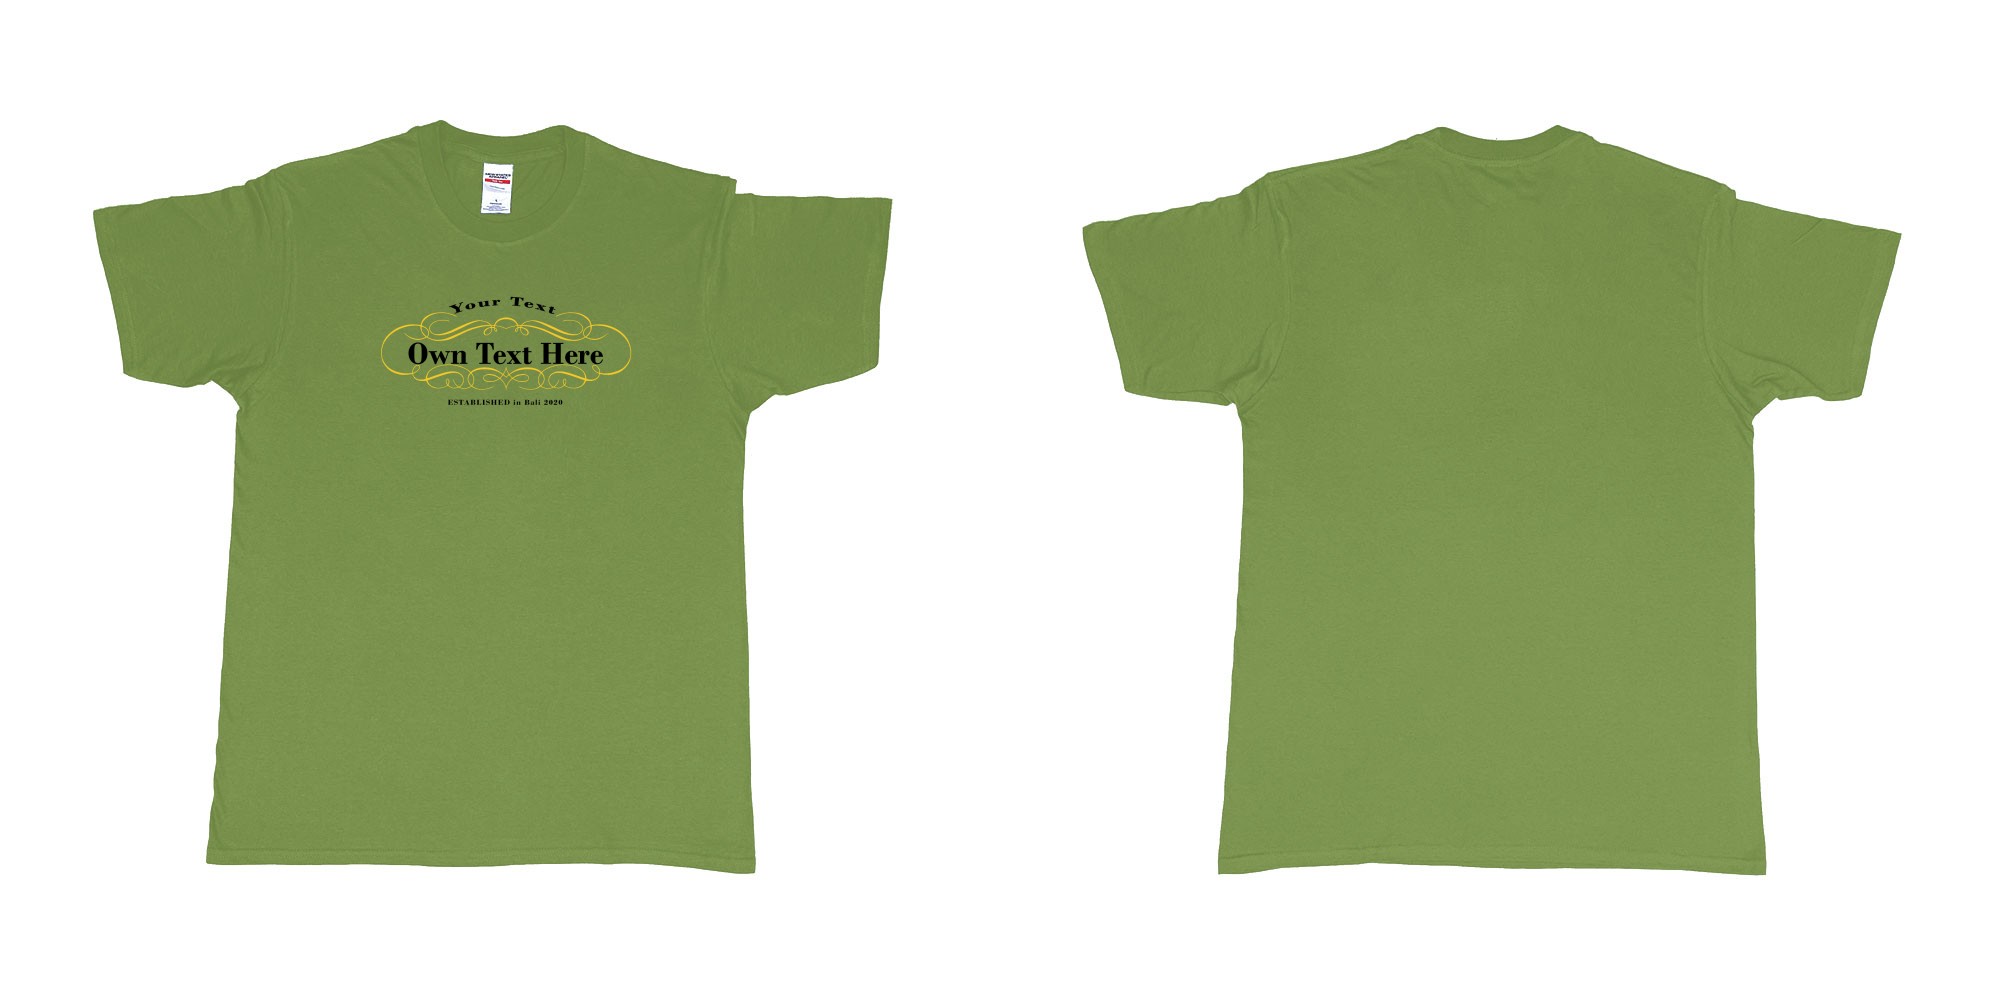 Custom tshirt design Laurent perrier in fabric color military-green choice your own text made in Bali by The Pirate Way